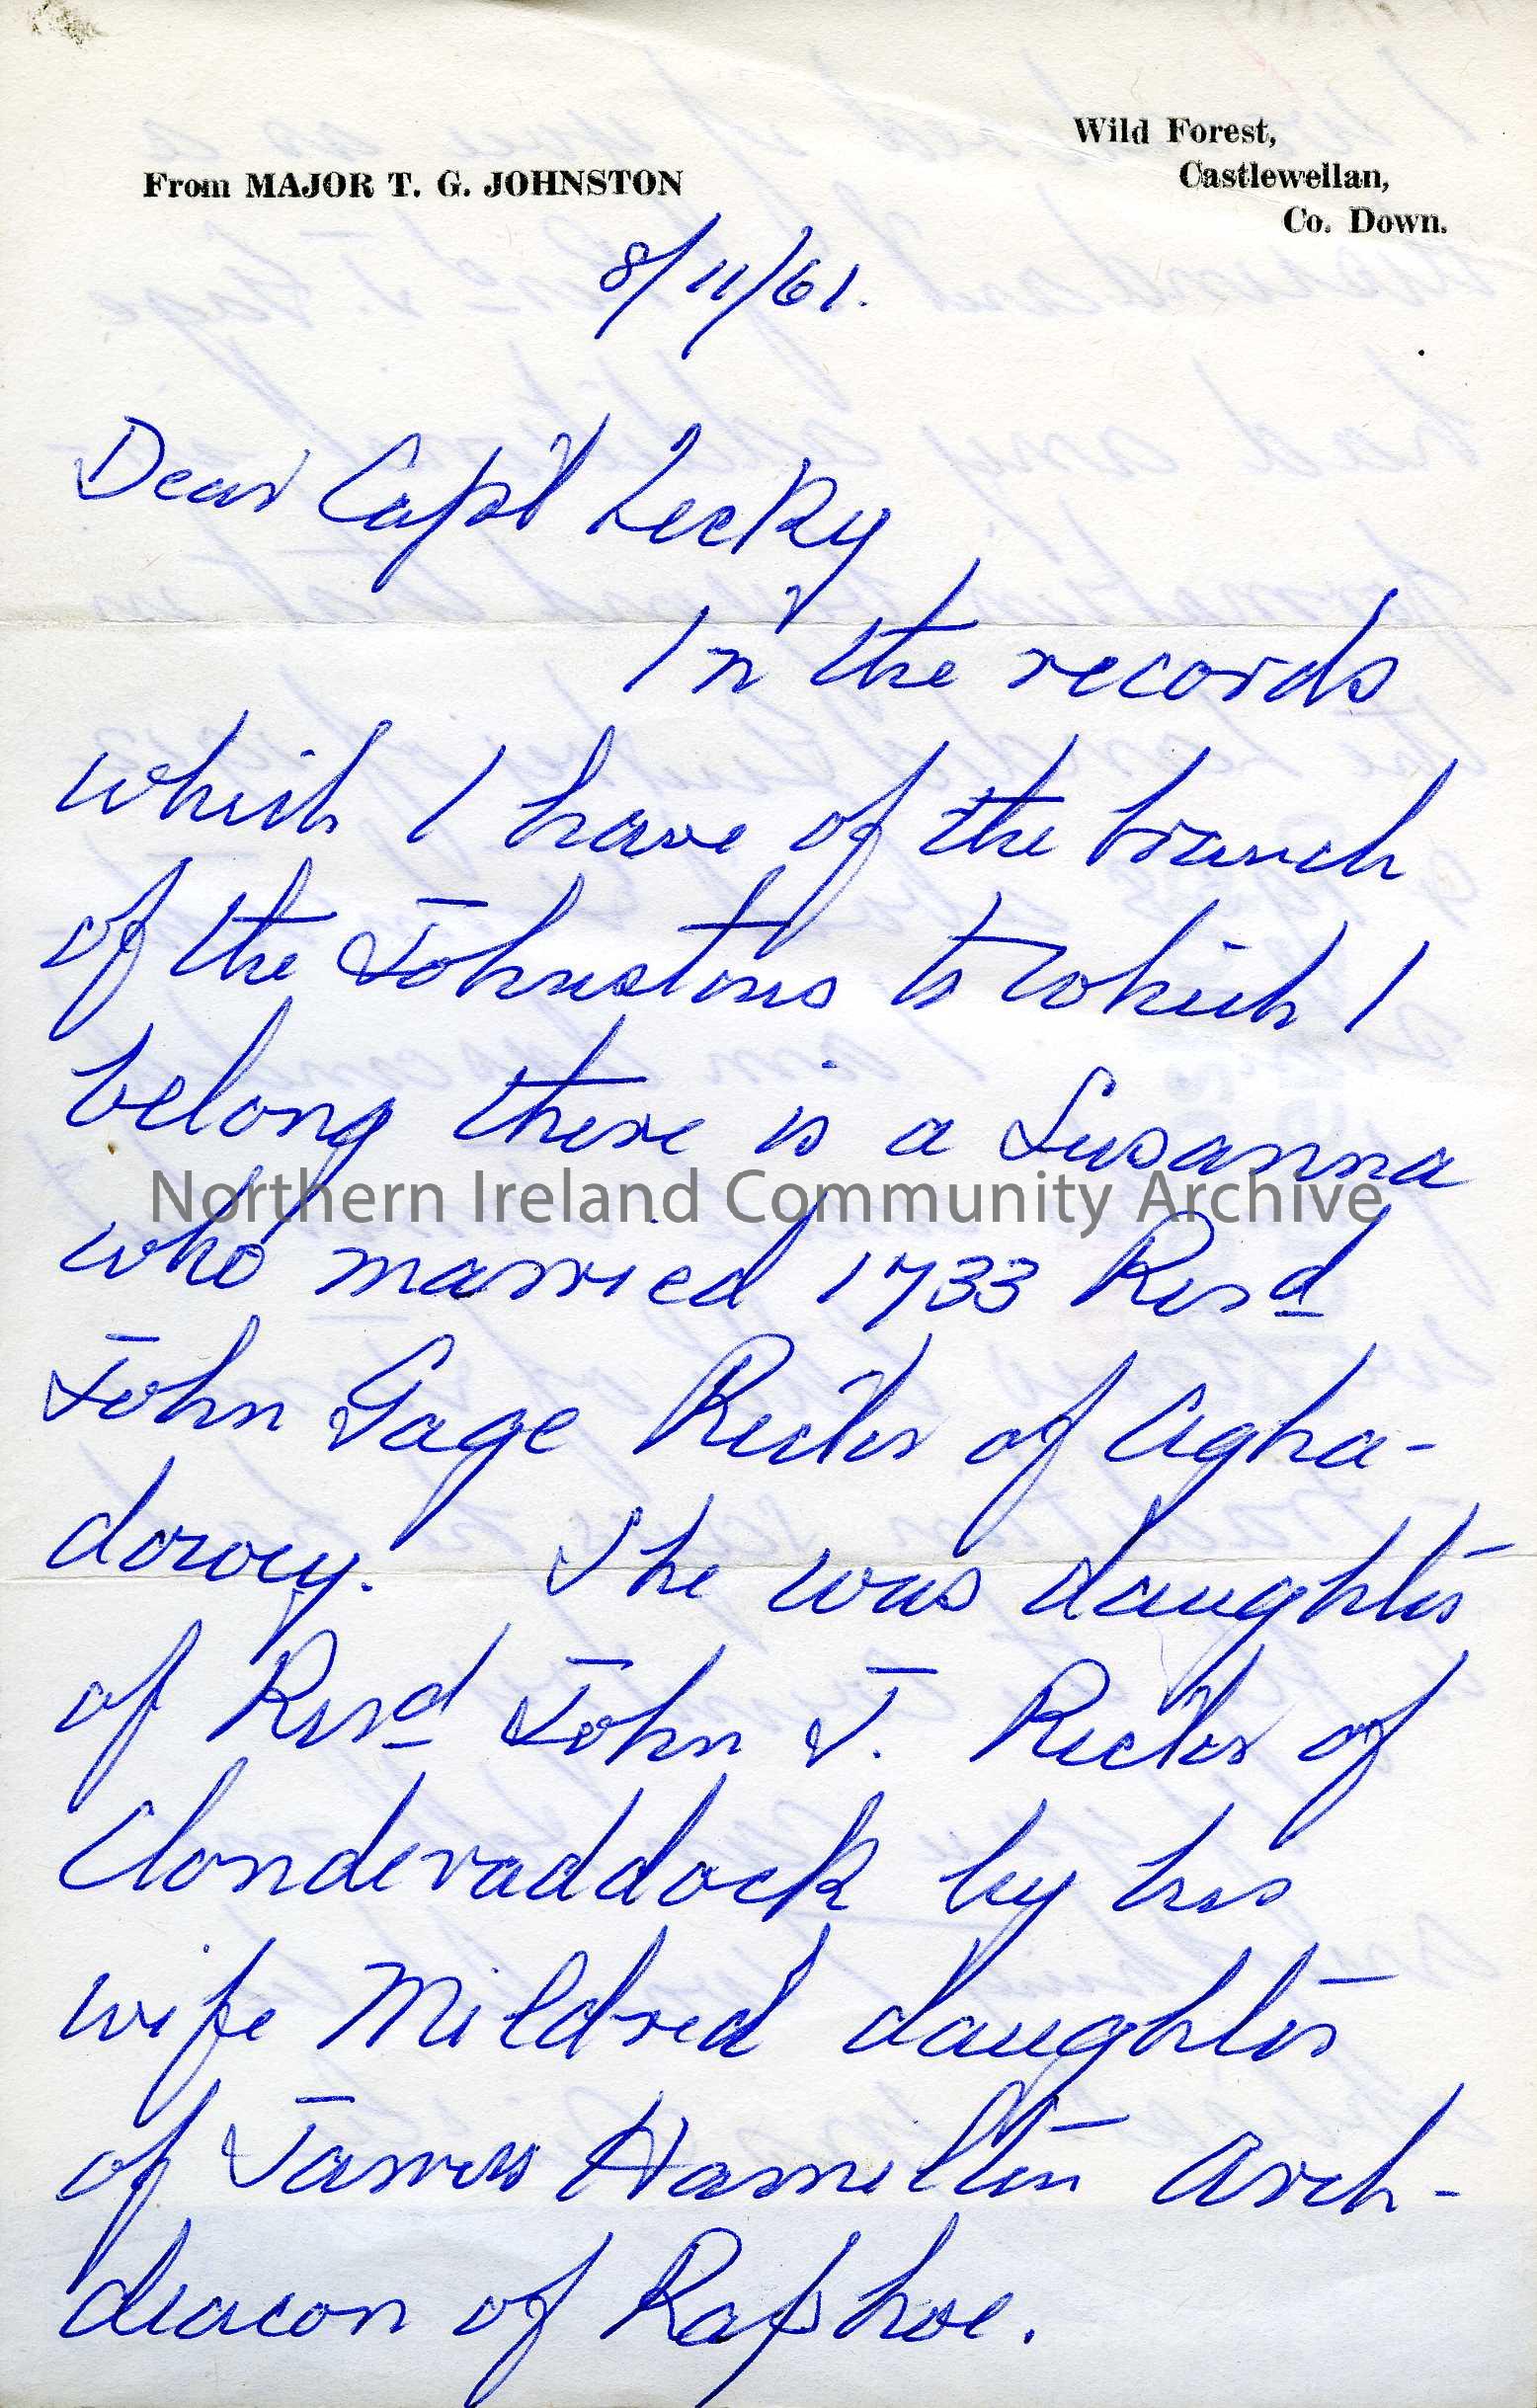 letter to Captain Lecky from Major T.G.Johnston dated 8/11/1961 (3956)